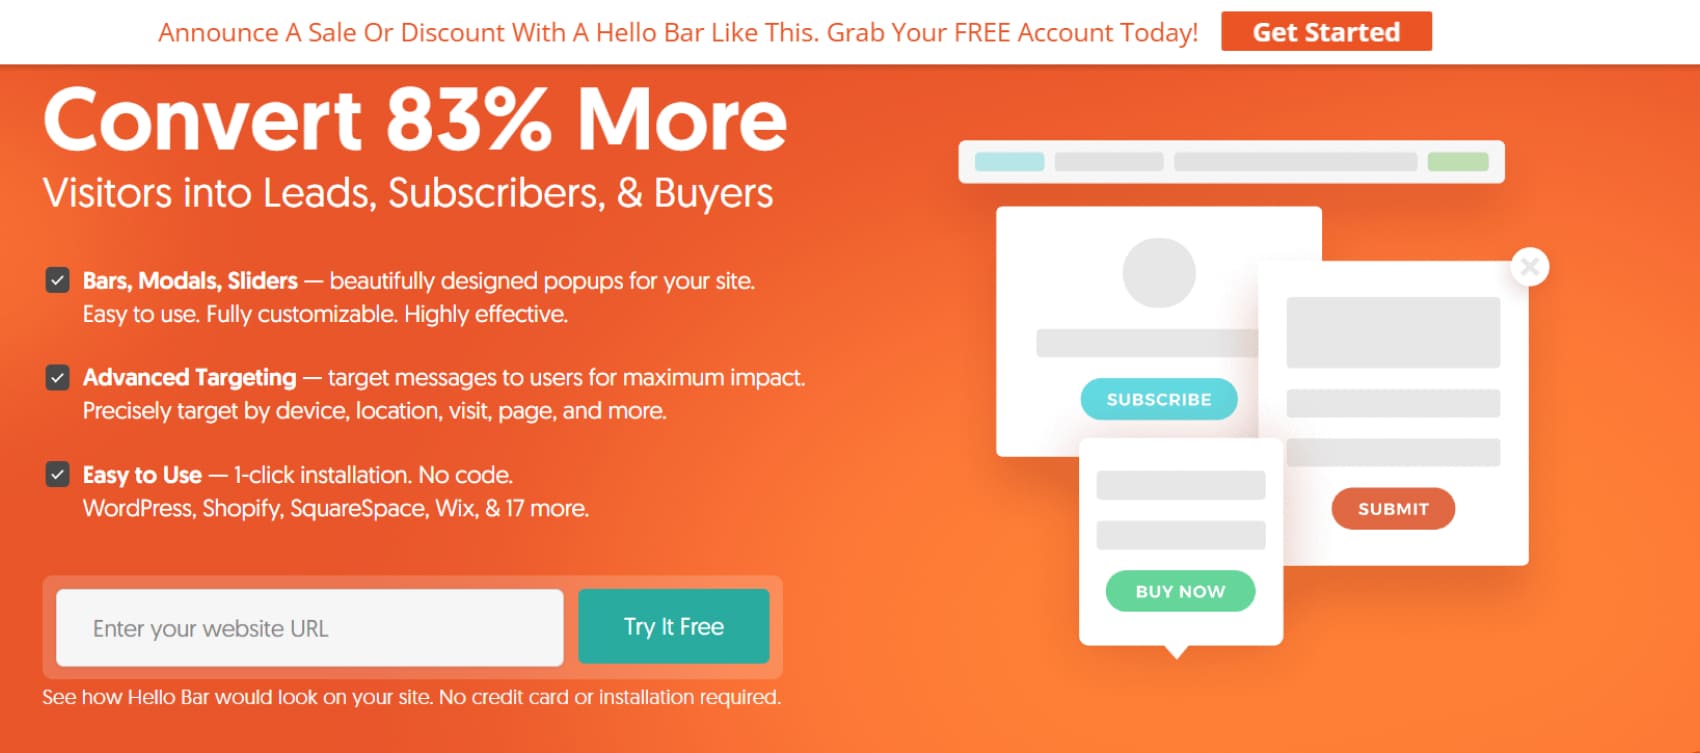 Hello Bar is a solution for effective inbound marketing